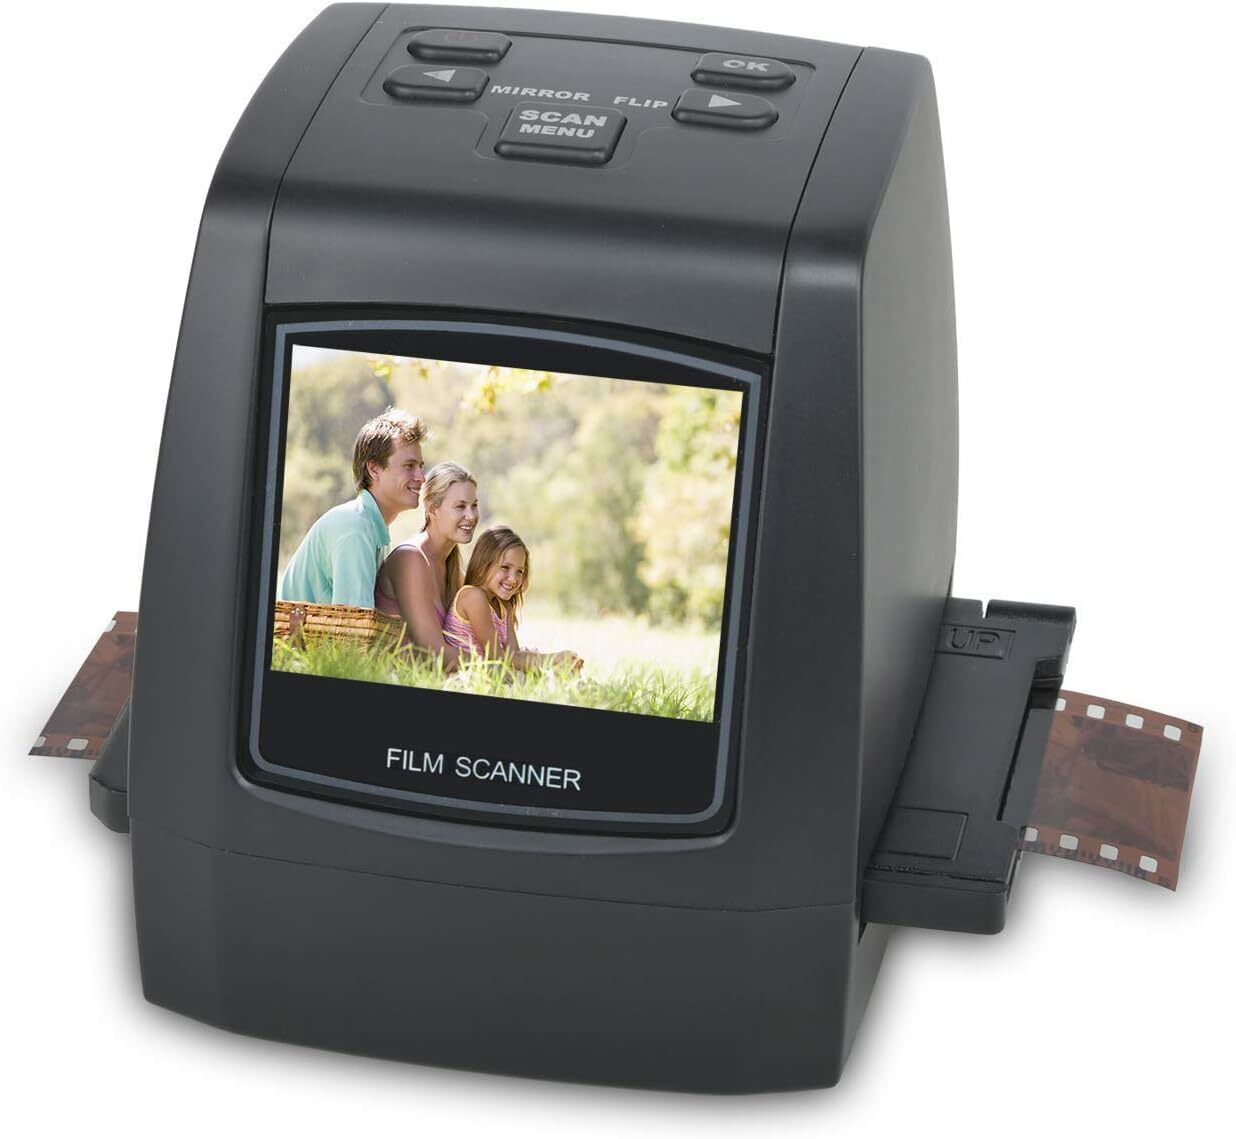 DIGITNOW 22MP All-in-1 Film & Slide Scanner Converts 35mm 135 110 126 and Super